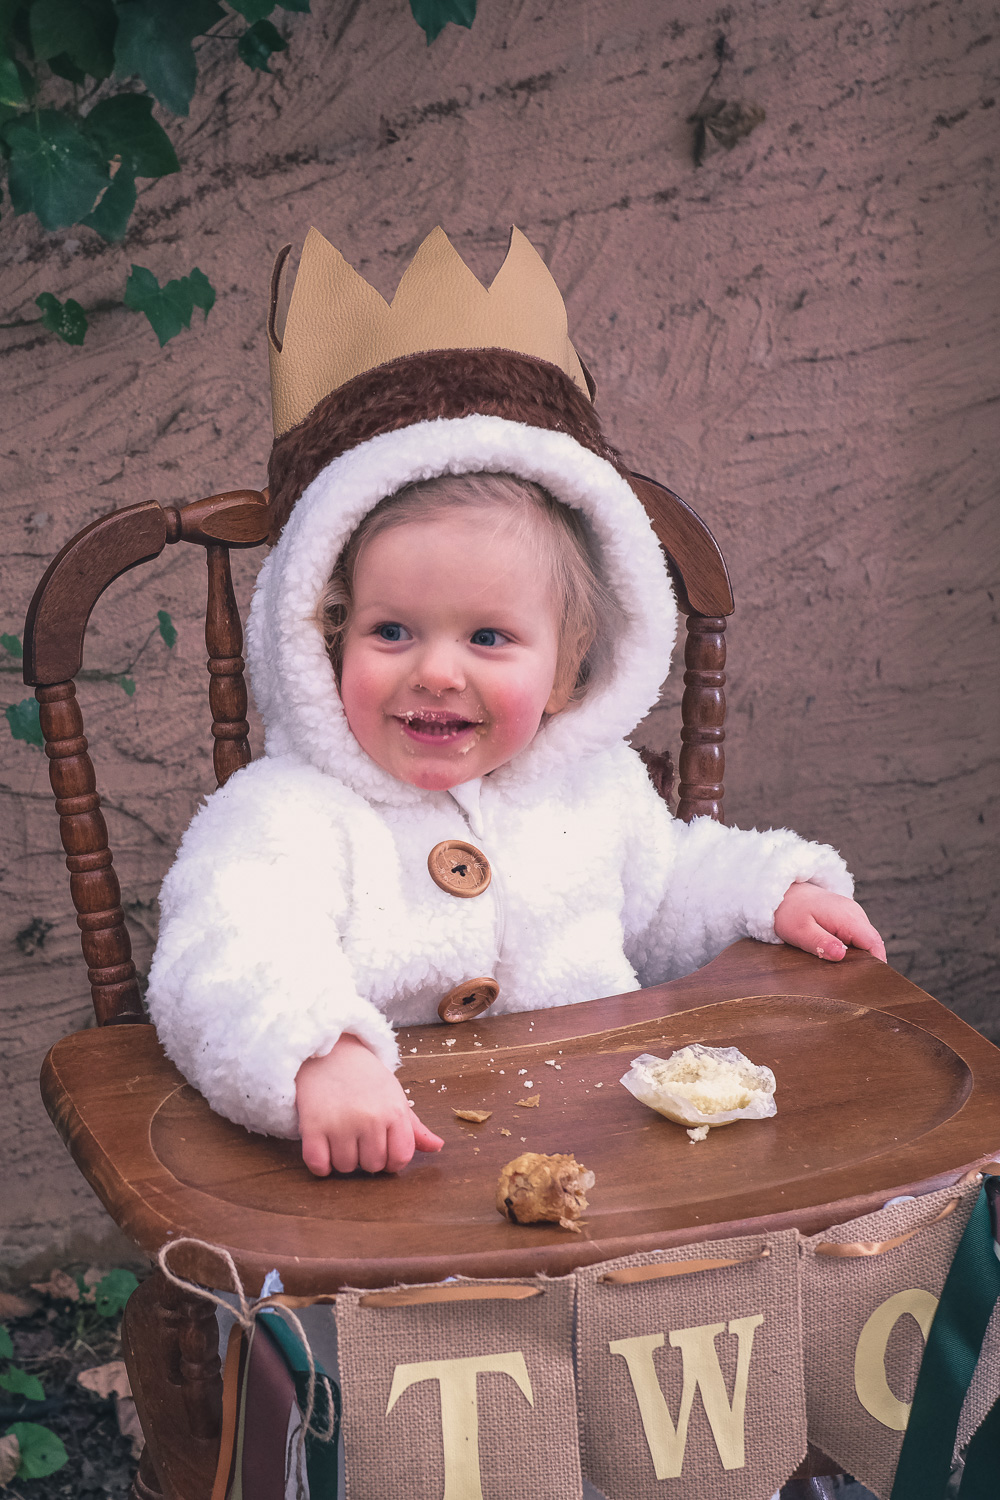 Child wearing Where The Wild Things Are party costume sits in a vintage high chair